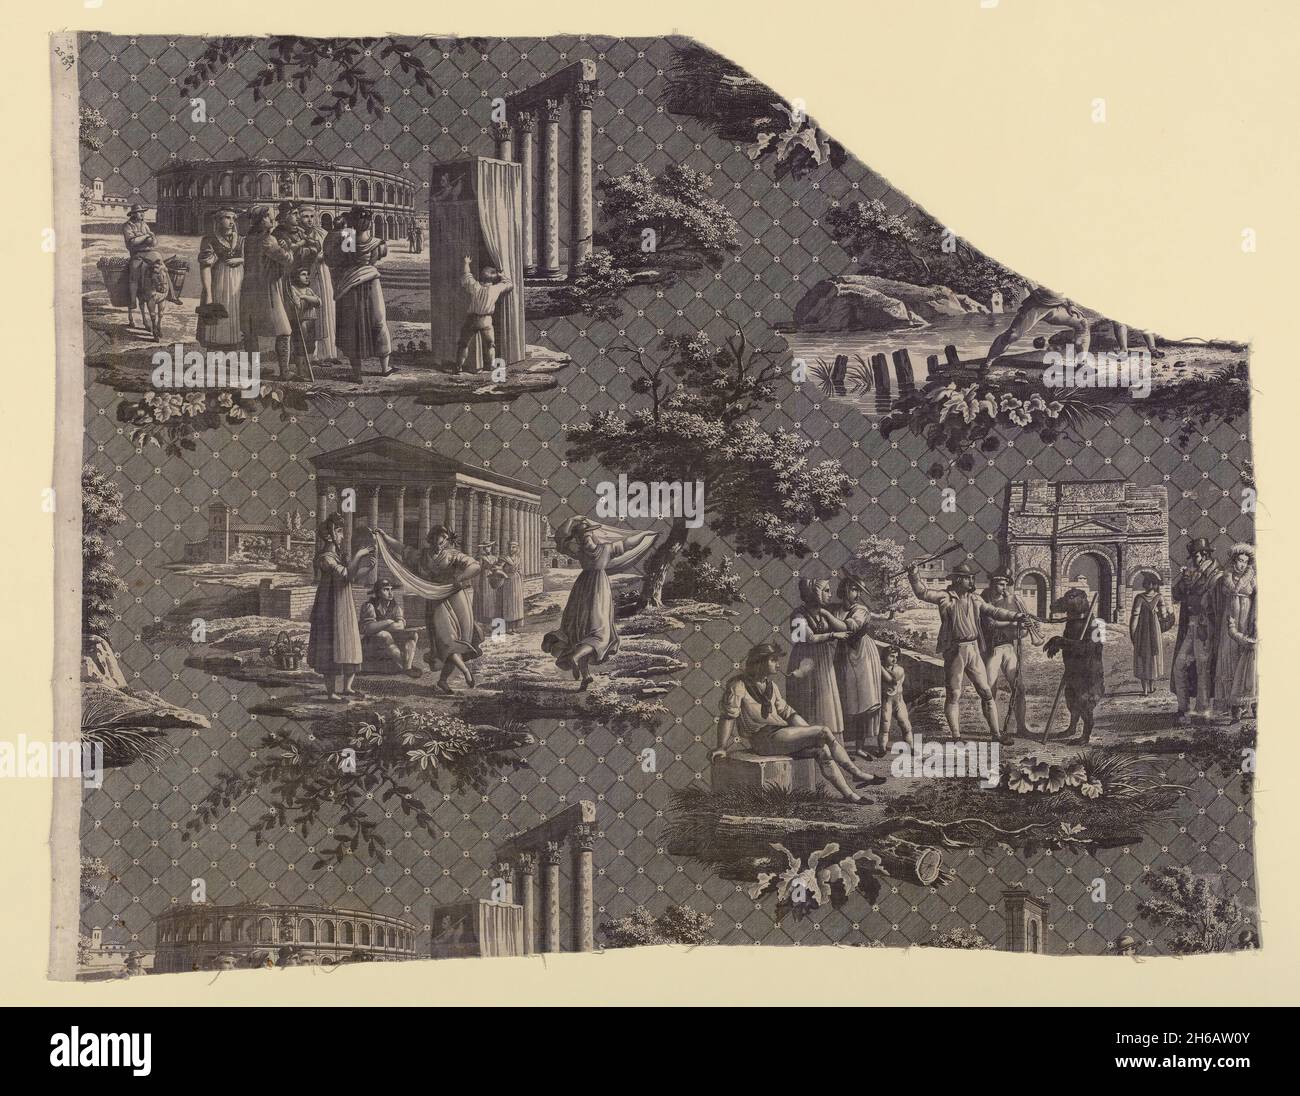 Les Monuments du Midi (Monuments of the South of France) (Furnishing Fabric), France, c.1811. Designed by Hippolyte Lebas, engraved by Nicolas Auguste Leisnier after etchings by Bartolomeo Pinelli. Stock Photo